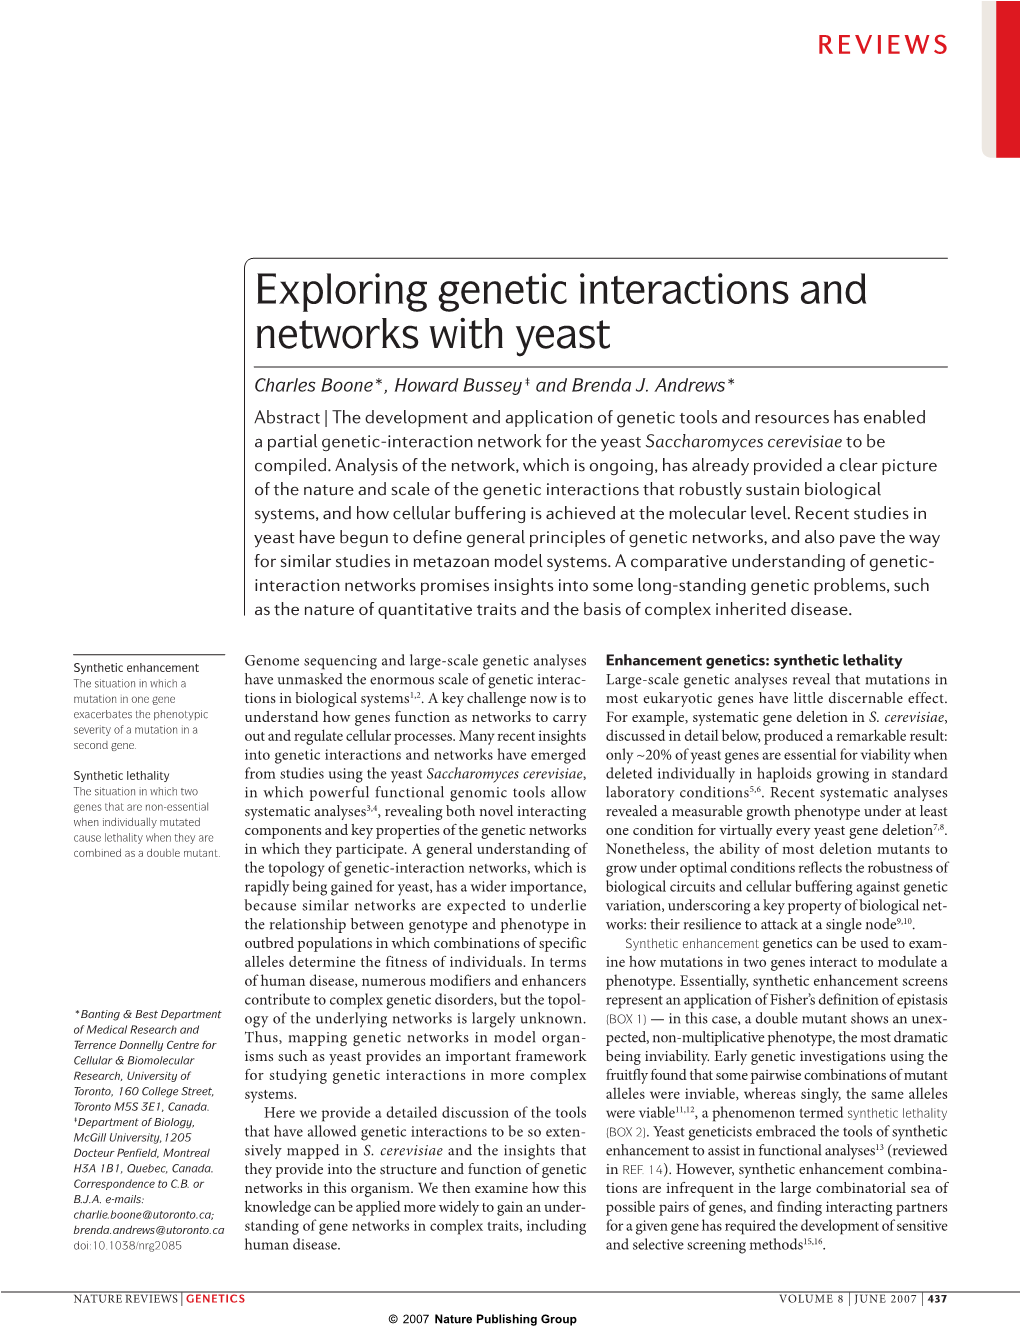 Exploring Genetic Interactions and Networks with Yeast